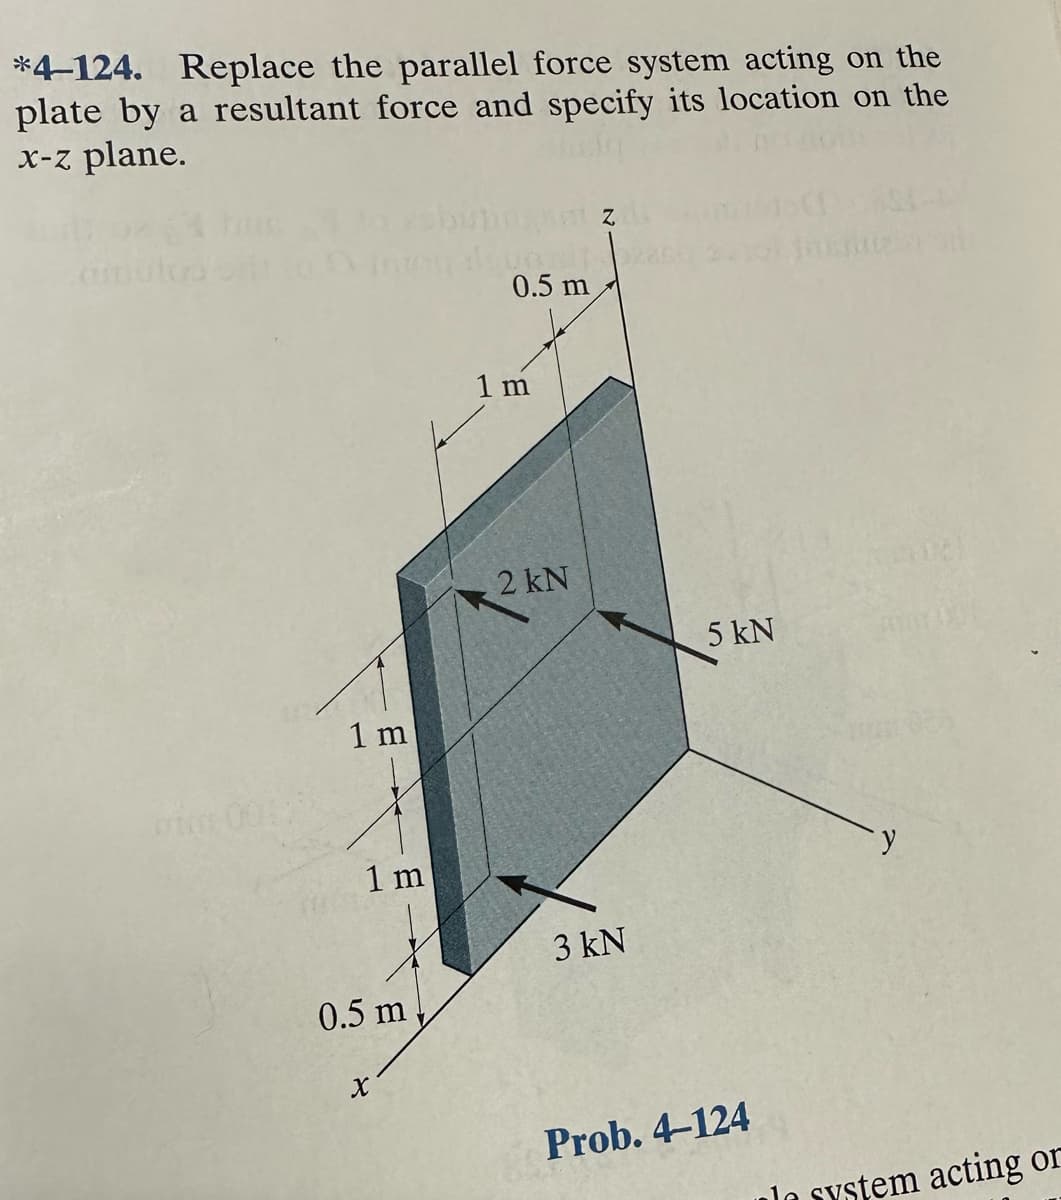 *4-124. Replace the parallel force system acting on the
plate by a resultant force and specify its location on the
x-z plane.
V
1 m
1 m
0.5 m
X
0.5 m
1 m
2 kN
3 kN
5 kN
Prob. 4-124
la system acting or